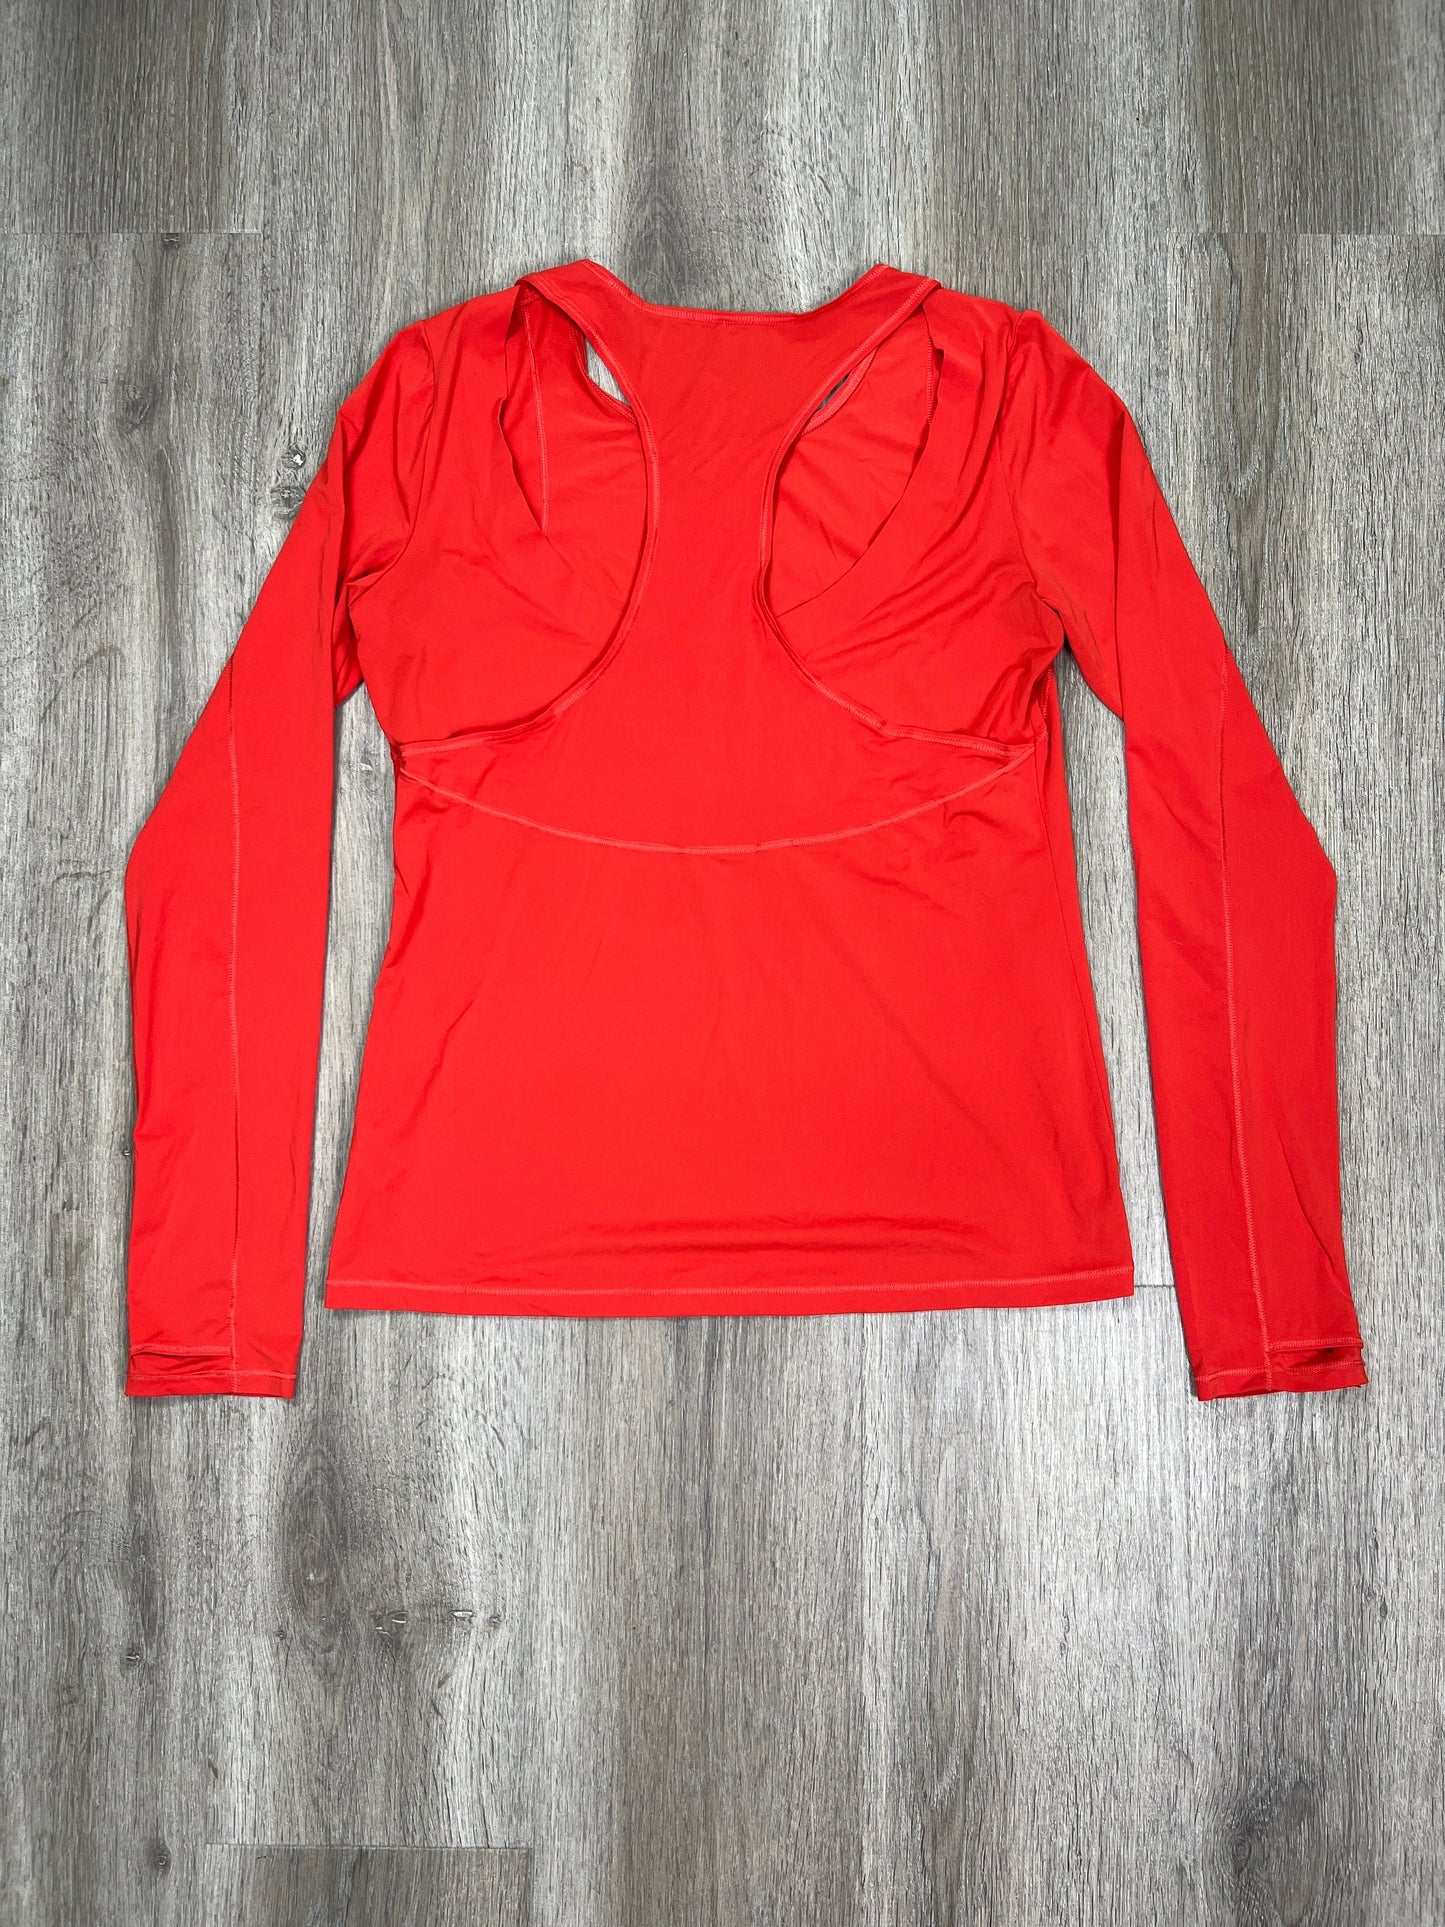 Red Athletic Top Long Sleeve Crewneck Athleta, Size S